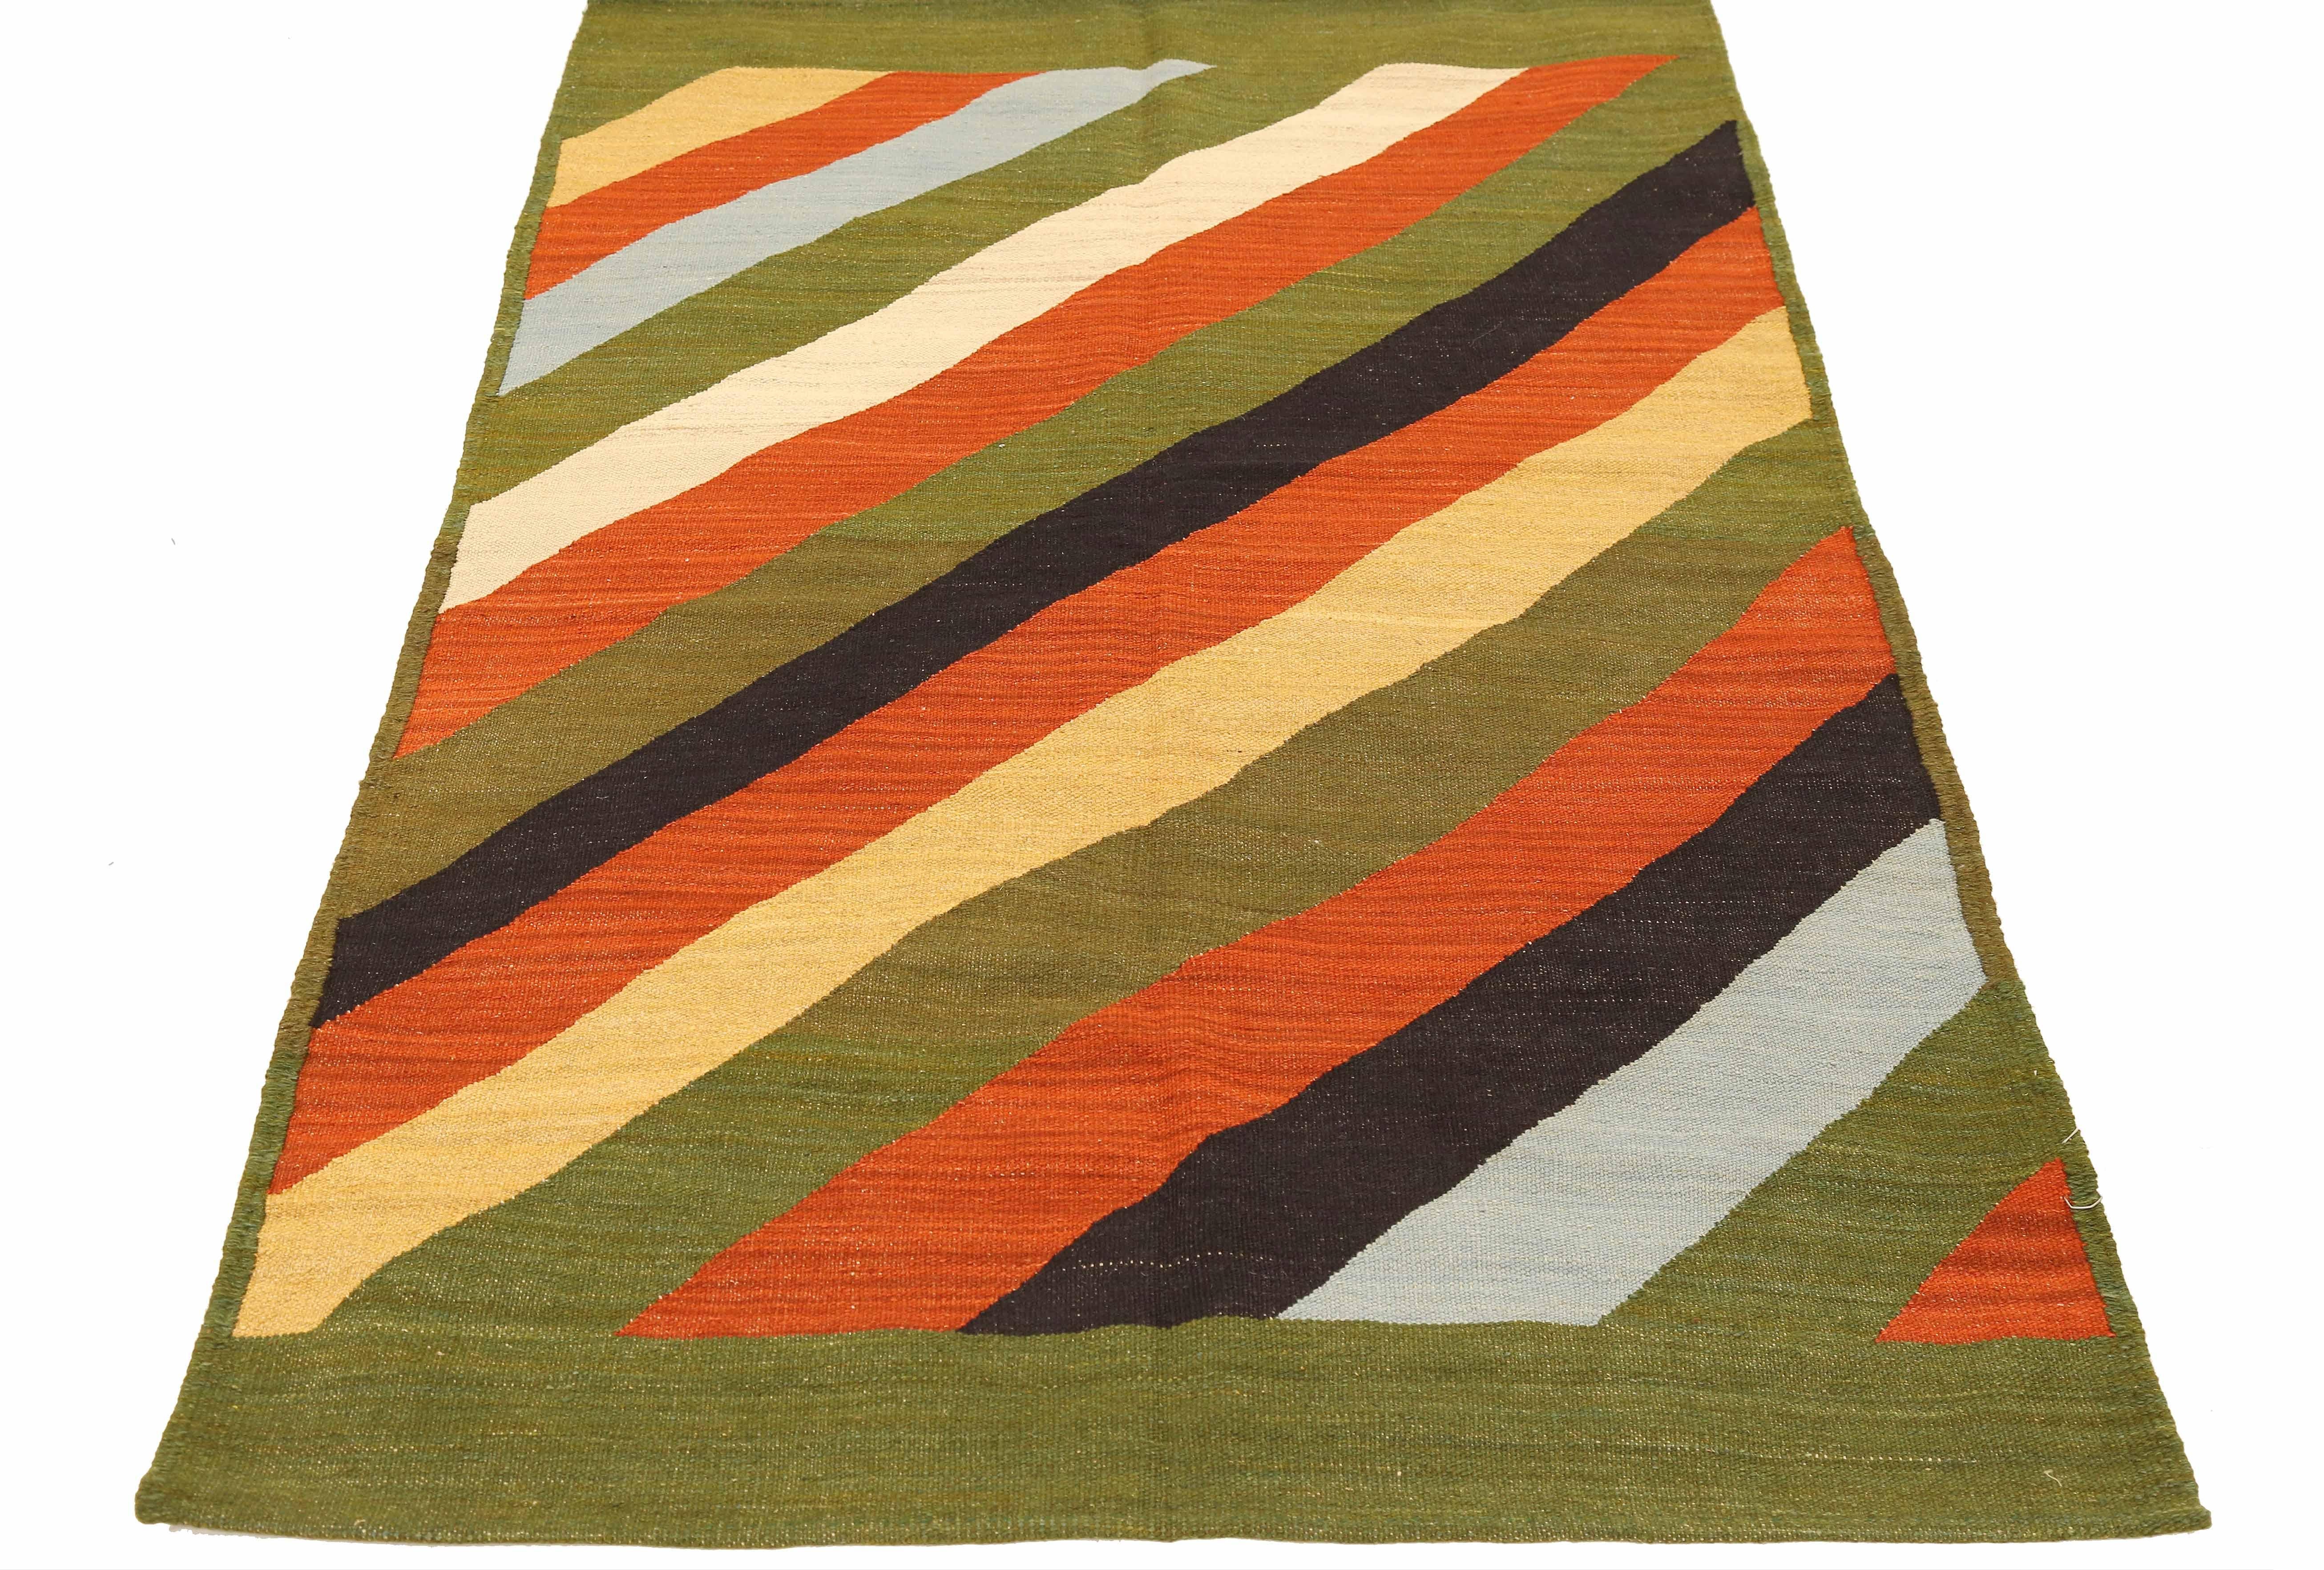 Modern Persian rug handwoven from the finest sheep’s wool and colored with all-natural vegetable dyes that are safe for humans and pets. It’s a traditional Kilim flat-weave design featuring diagonal colored stripes on a green field. It’s a stunning